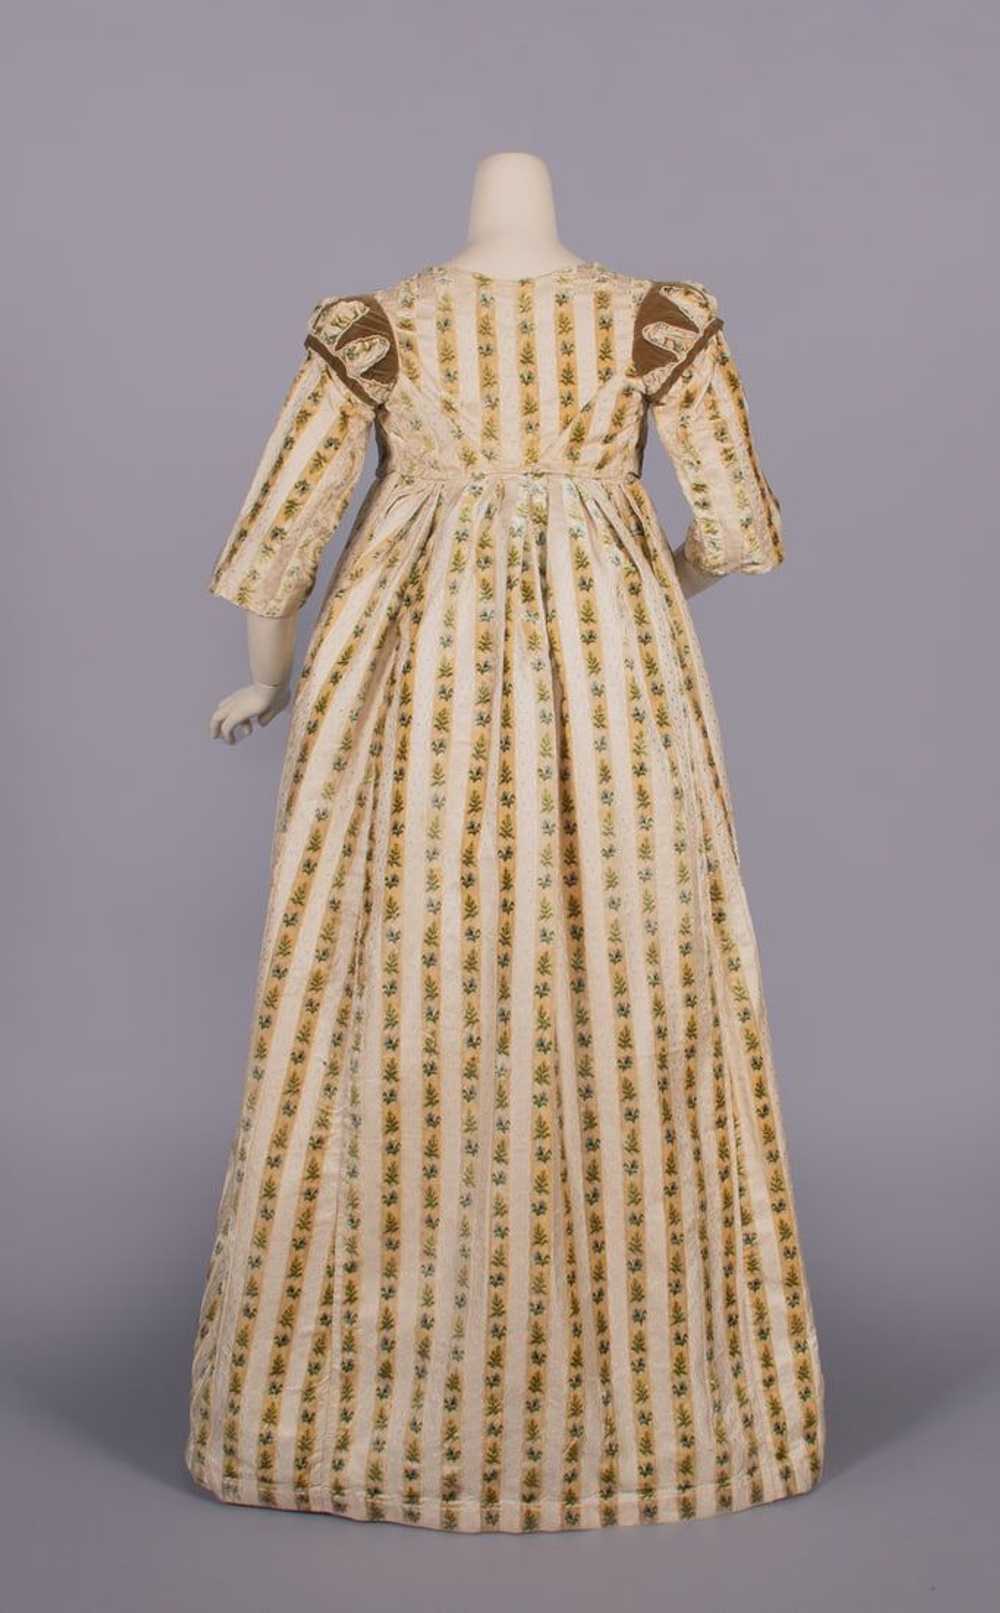 PRINTED VELVET & PATTERNED SILK ROUND GOWN, c. 17… - image 4